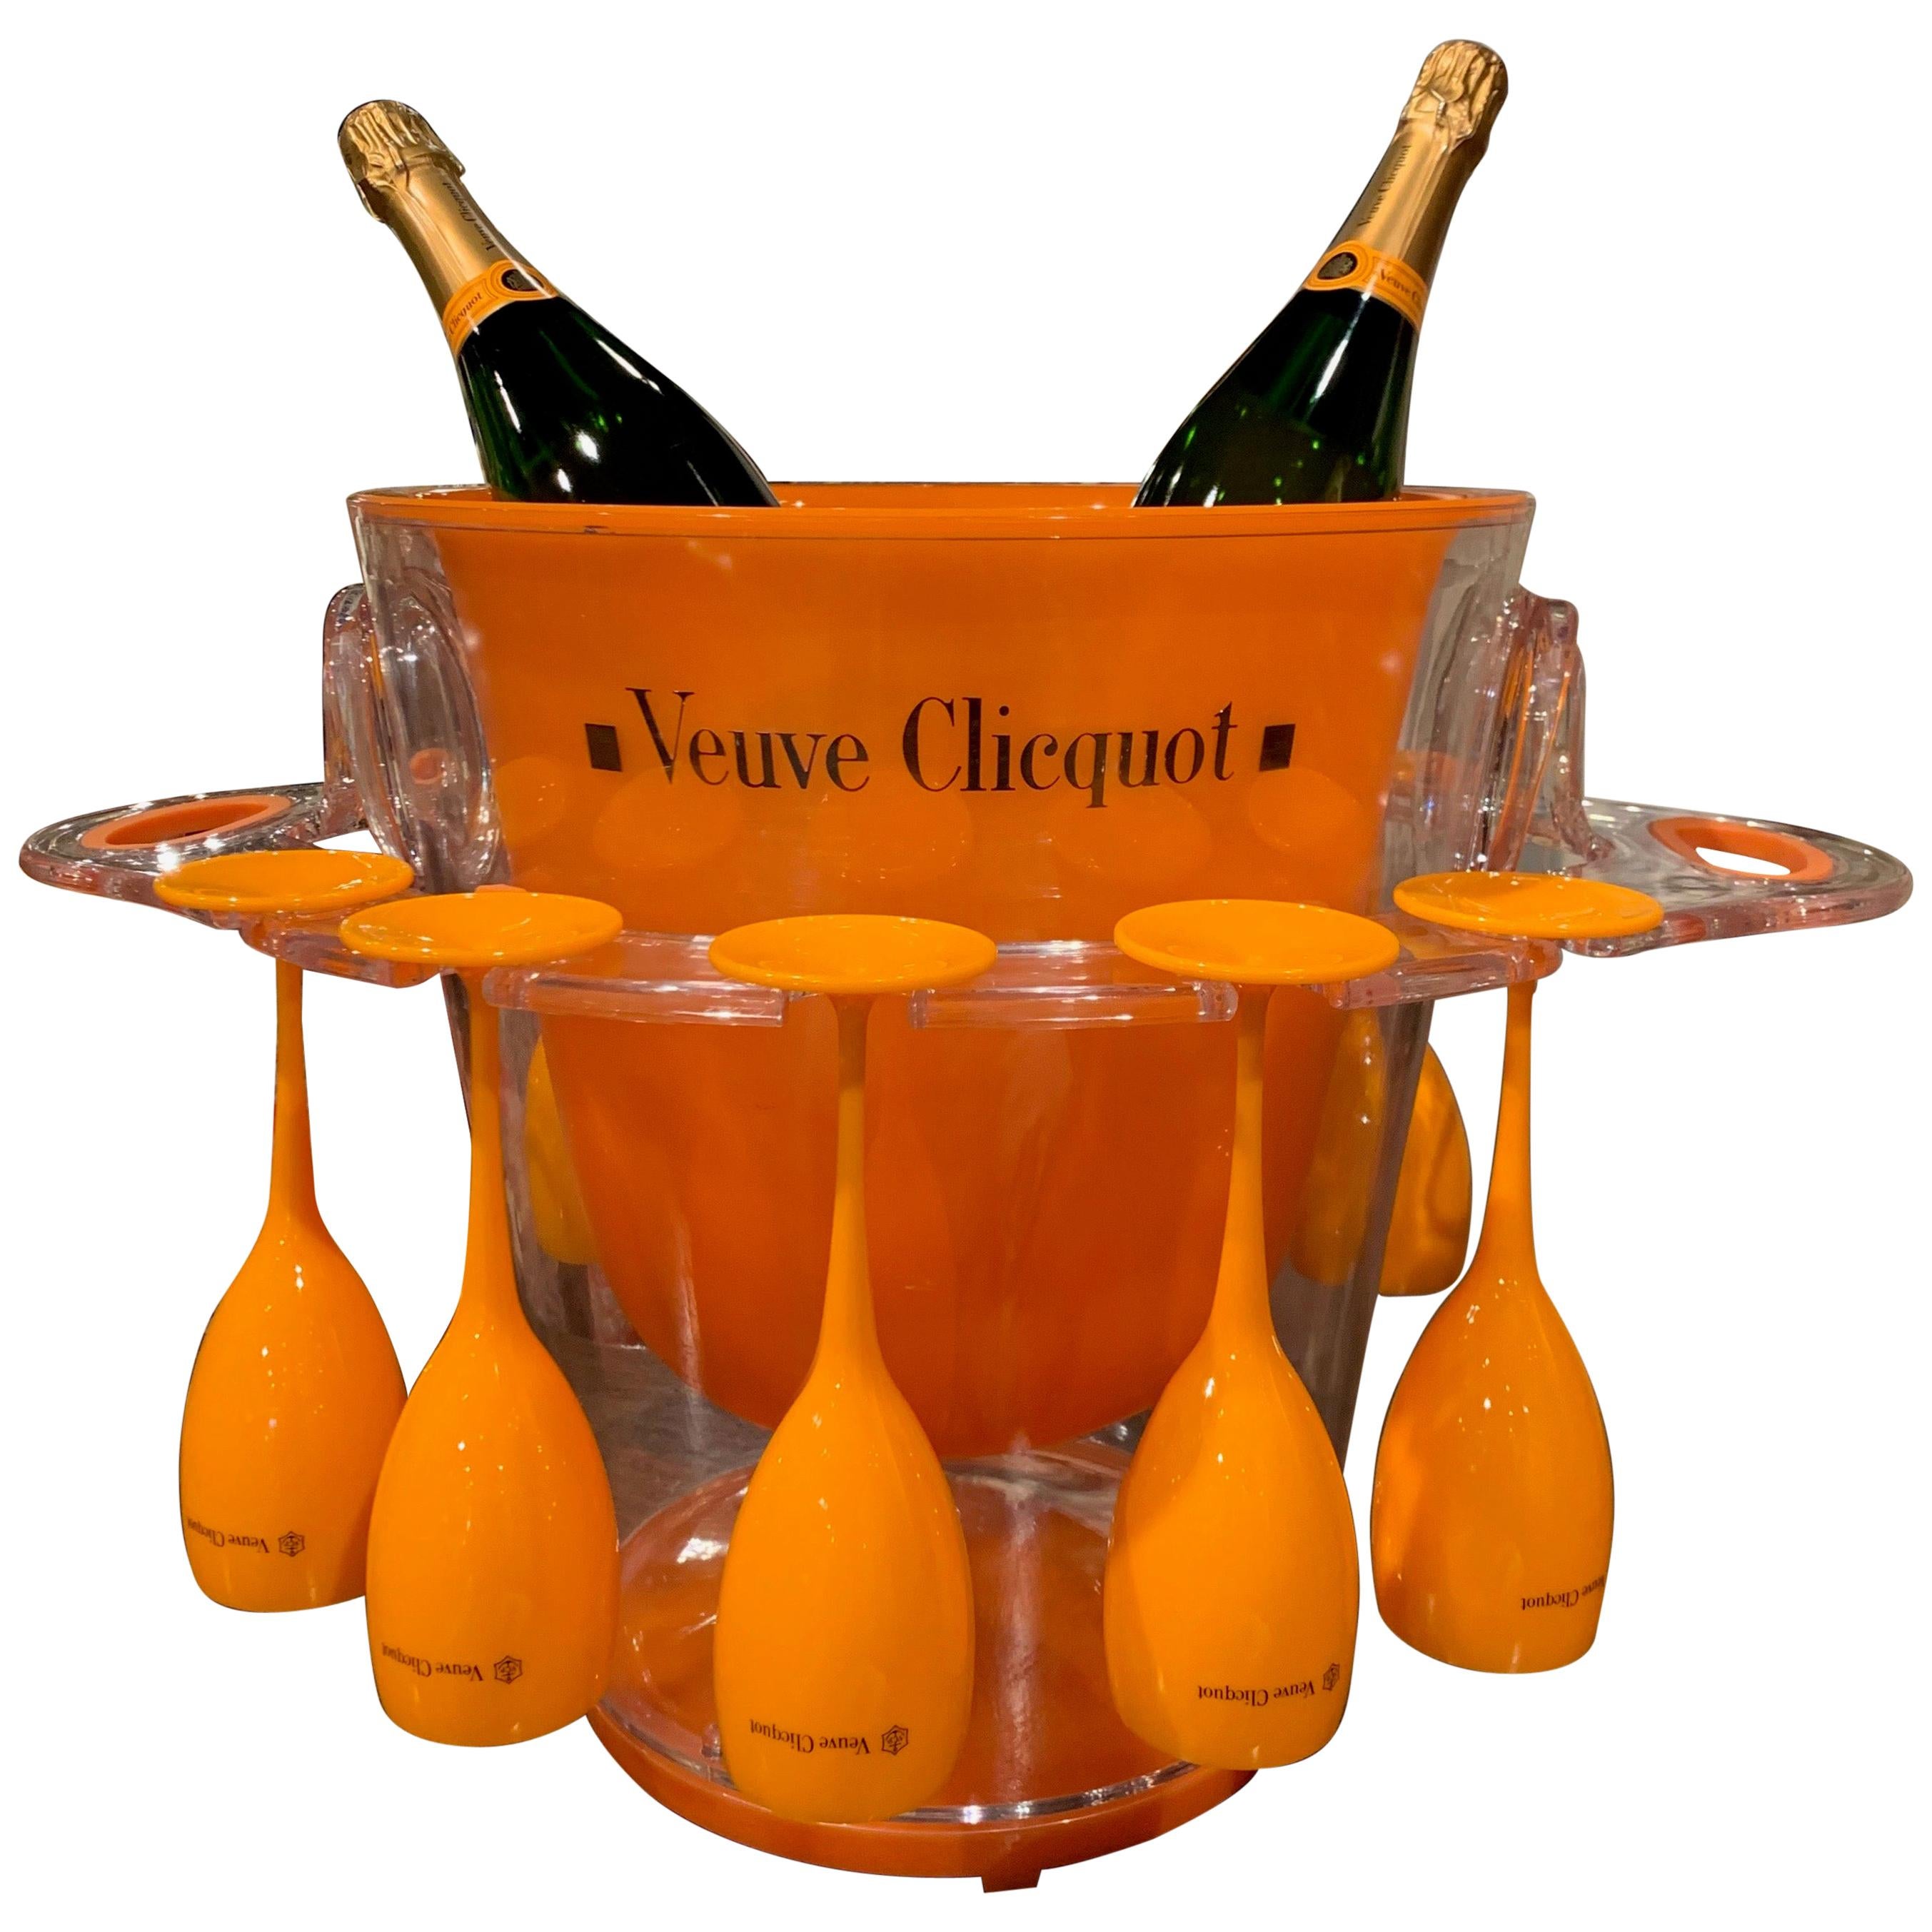 Vintage French Acrylic "Veuve Clicquot" Champagne Cooler and Ten Matching Flutes